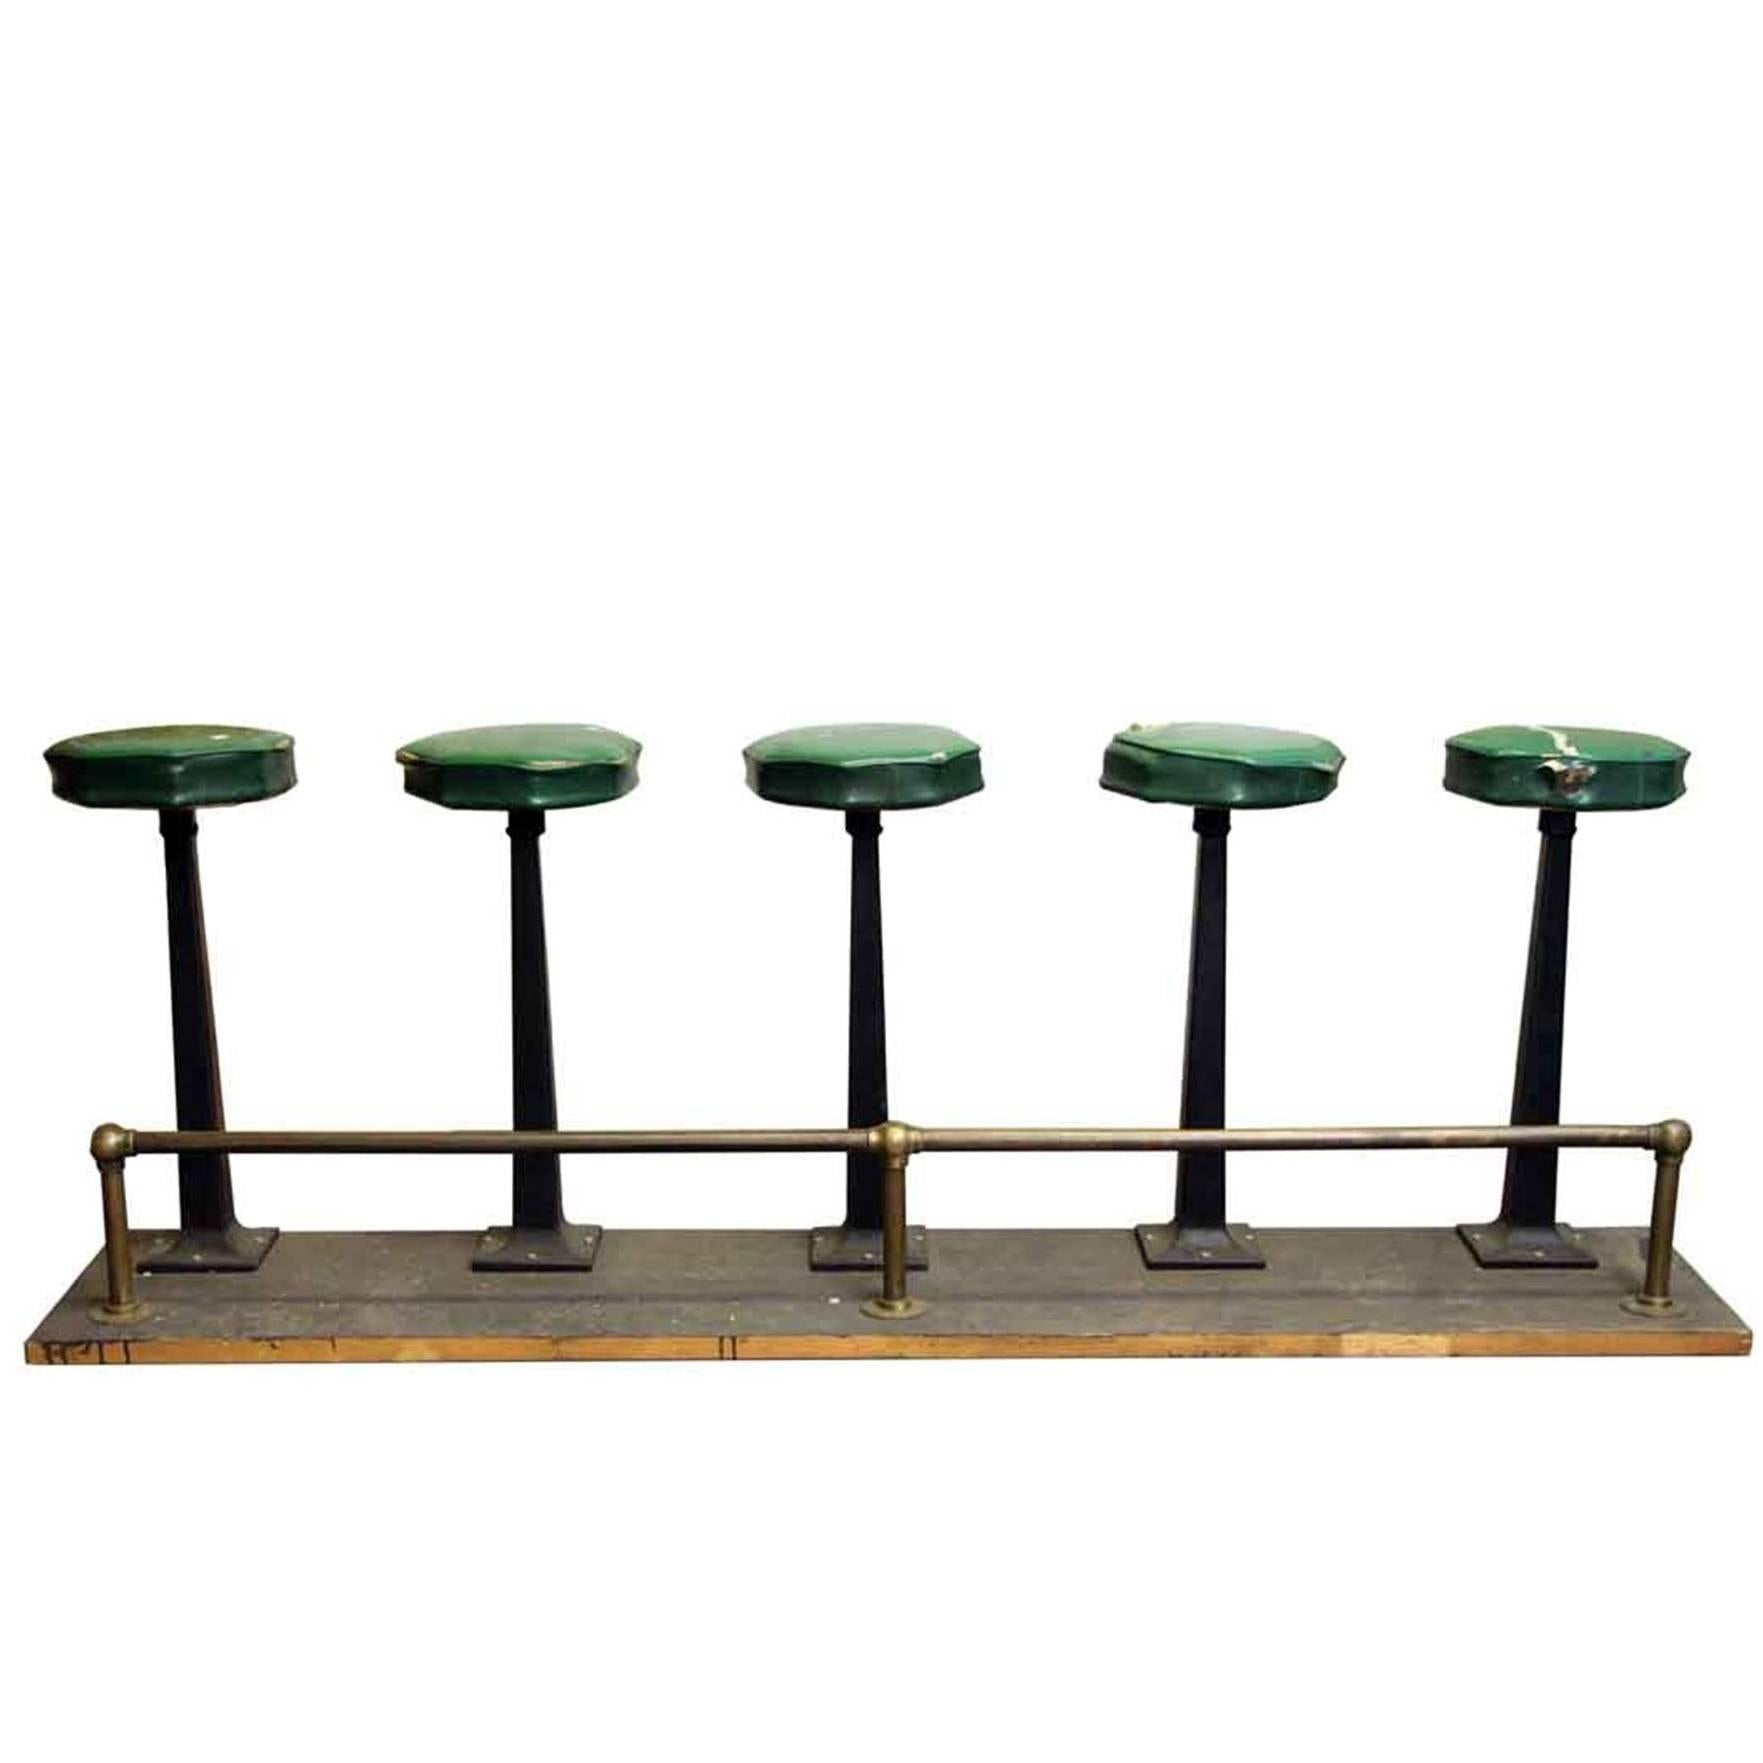 1890s Five-Seat Stool Unit with Brass Foot Rail Rest